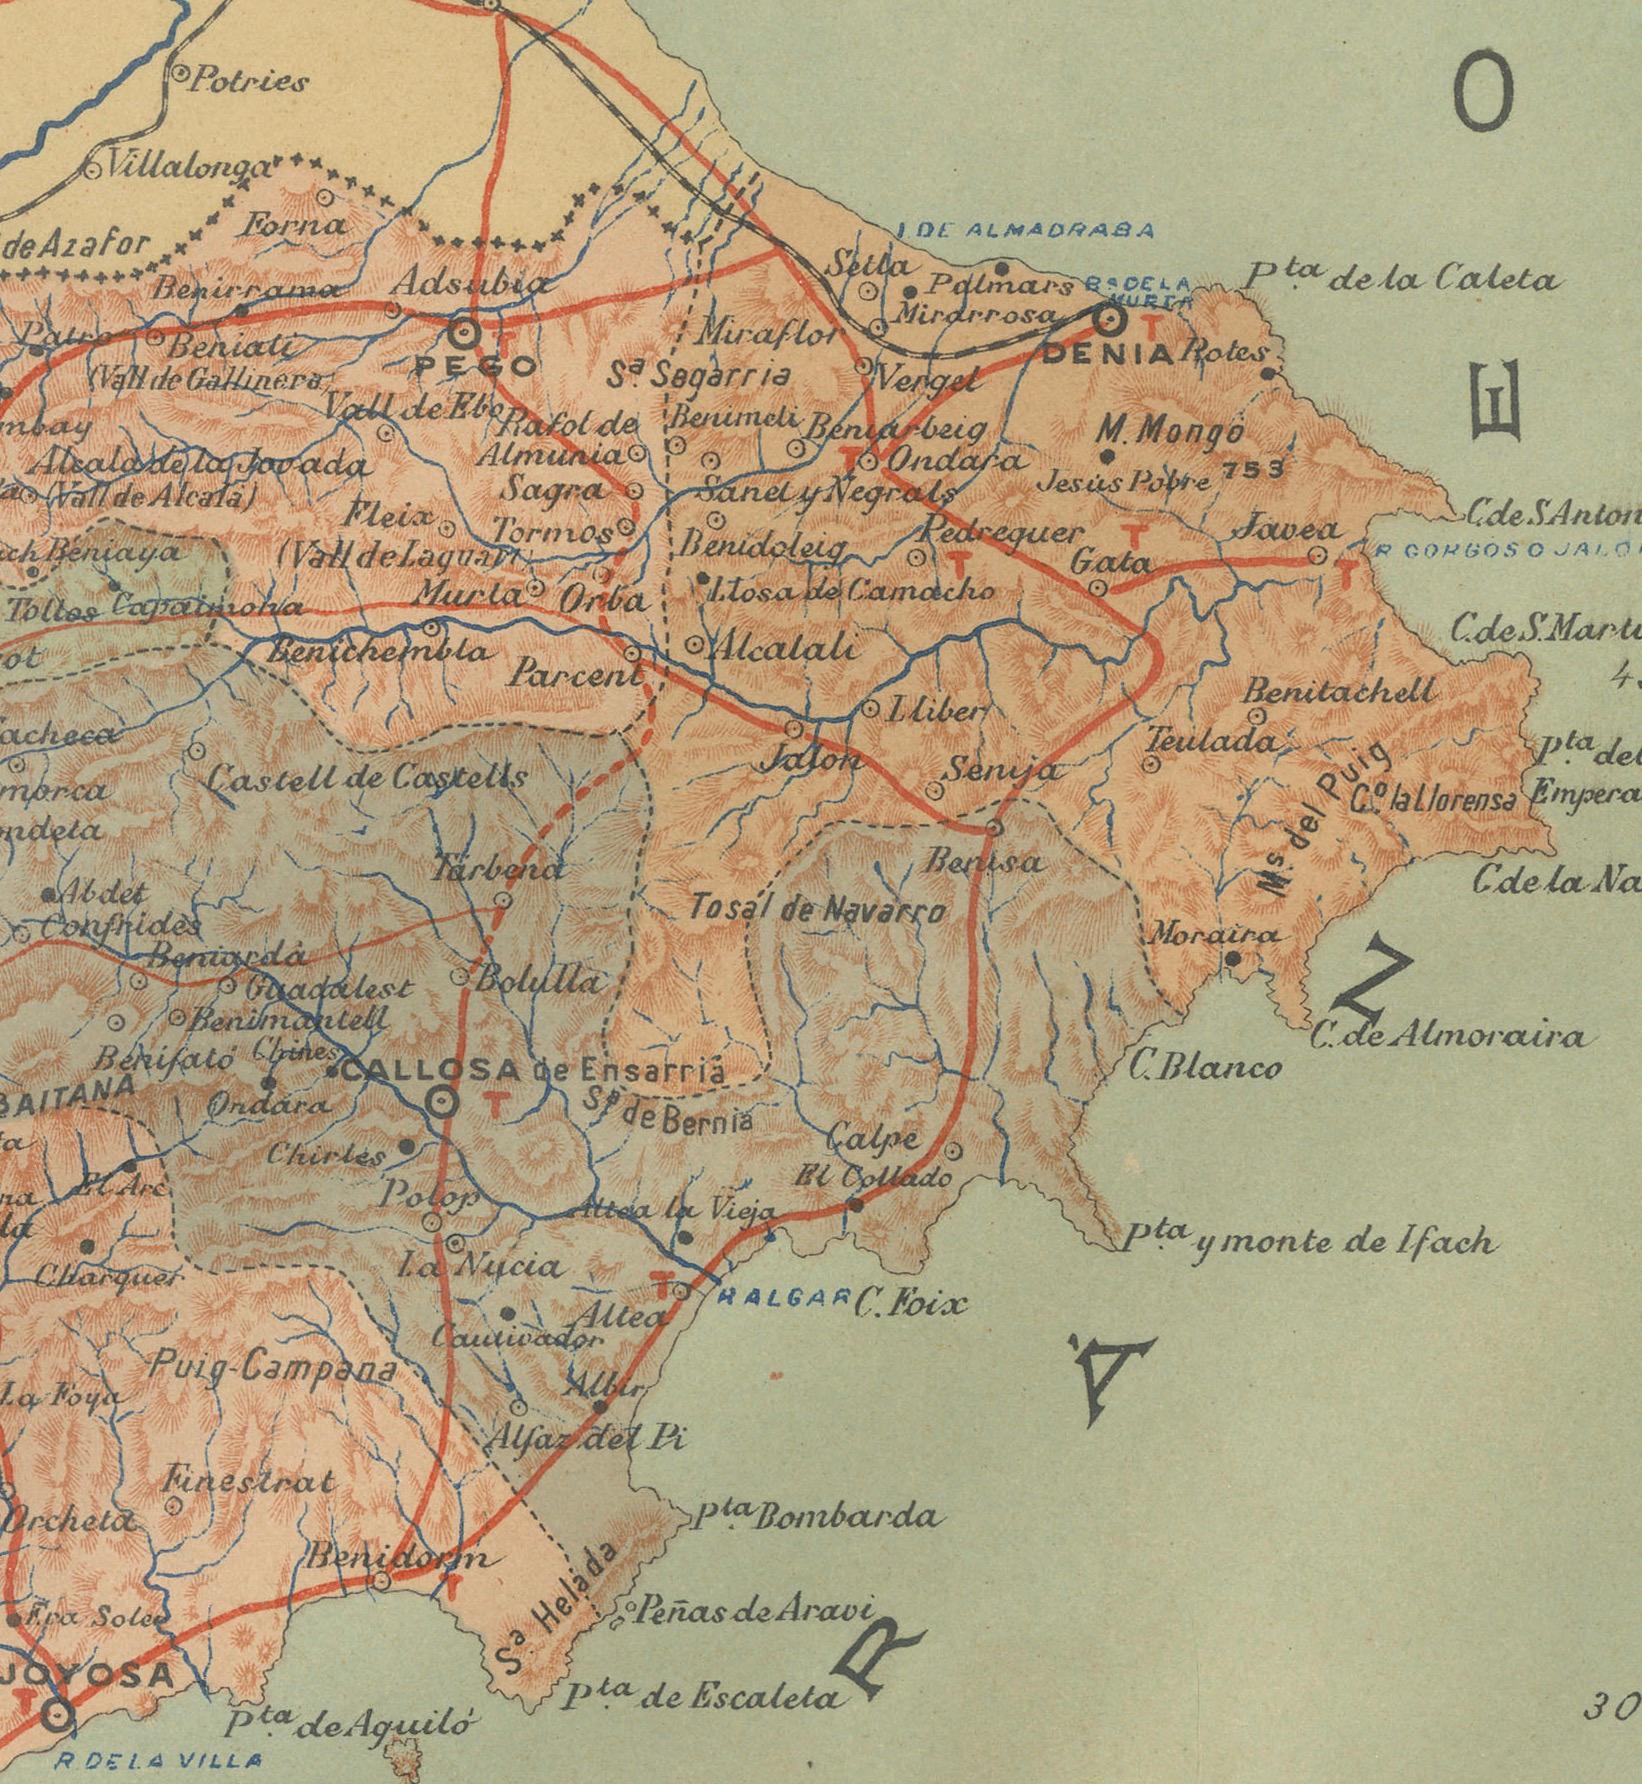 An original antique map of the province of Alicante, dated 1901. It is part of the atlas series by D. Benito Chias y Carbo, featuring cartographic elements.

Here are some characteristics of the map:

It outlines the borders of Alicante province